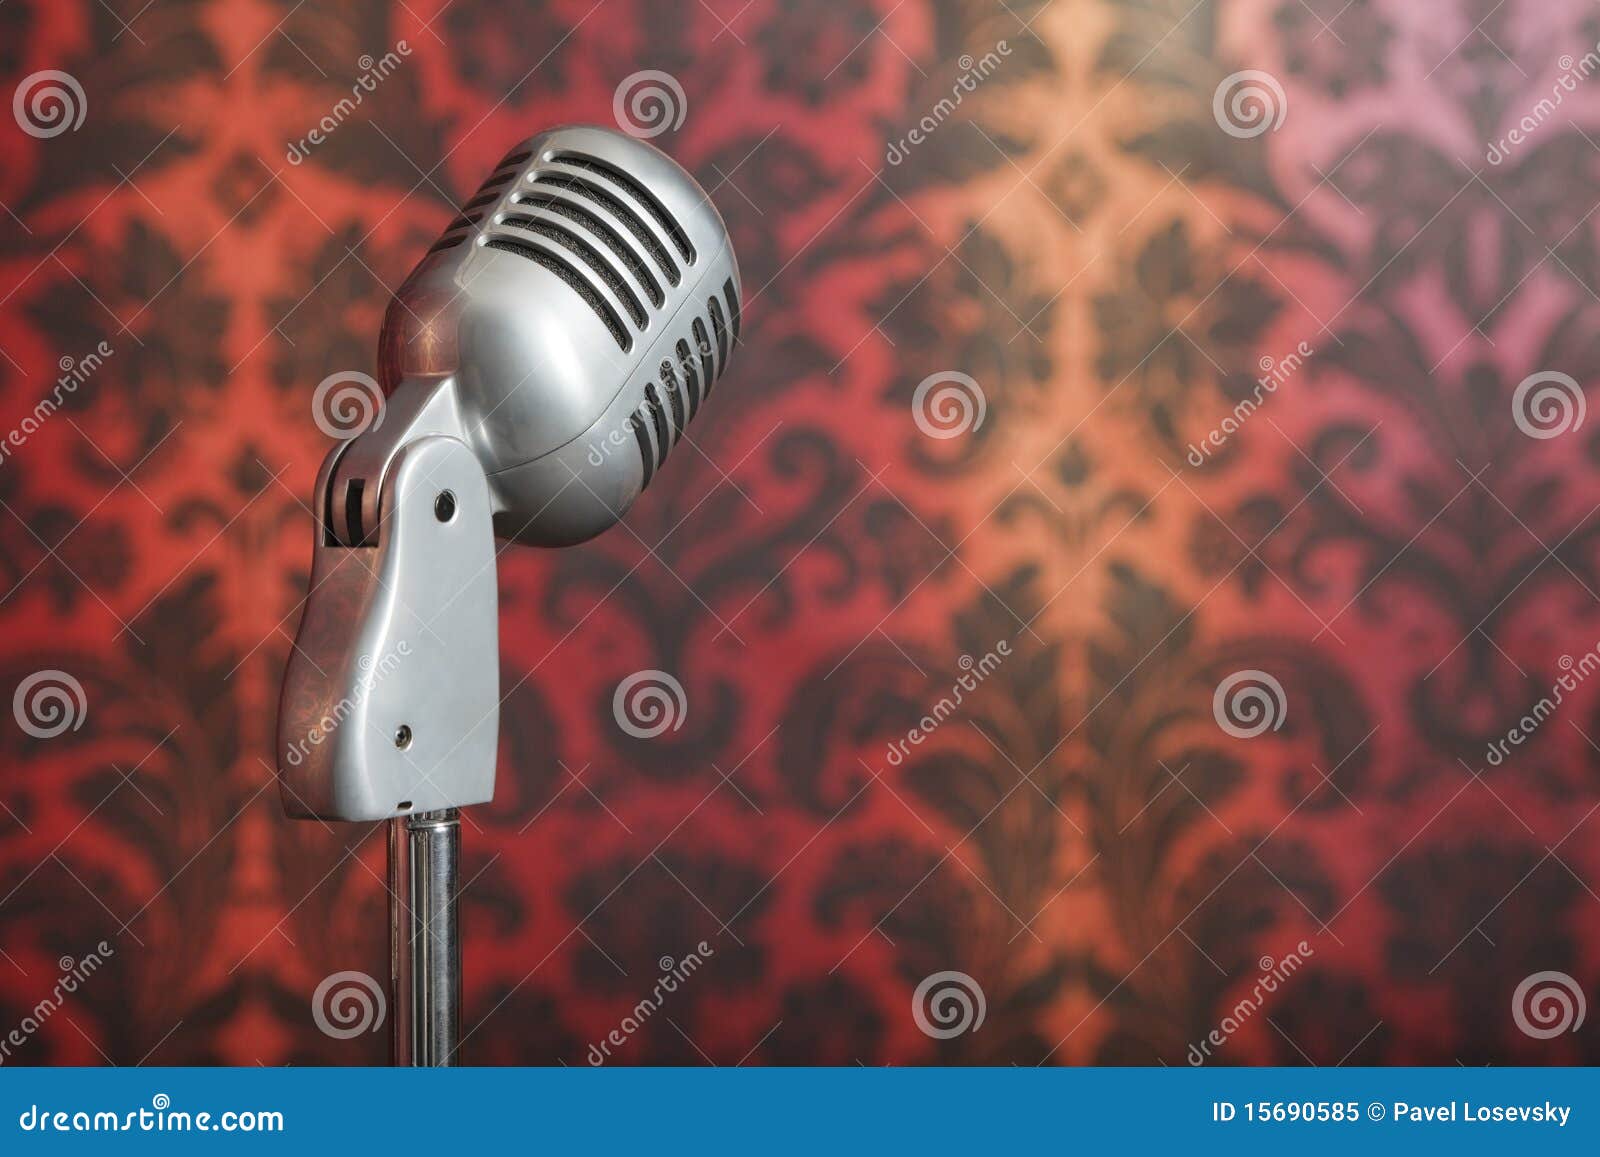 Microphone Images  Free Photos PNG Stickers Wallpapers  Backgrounds   rawpixel